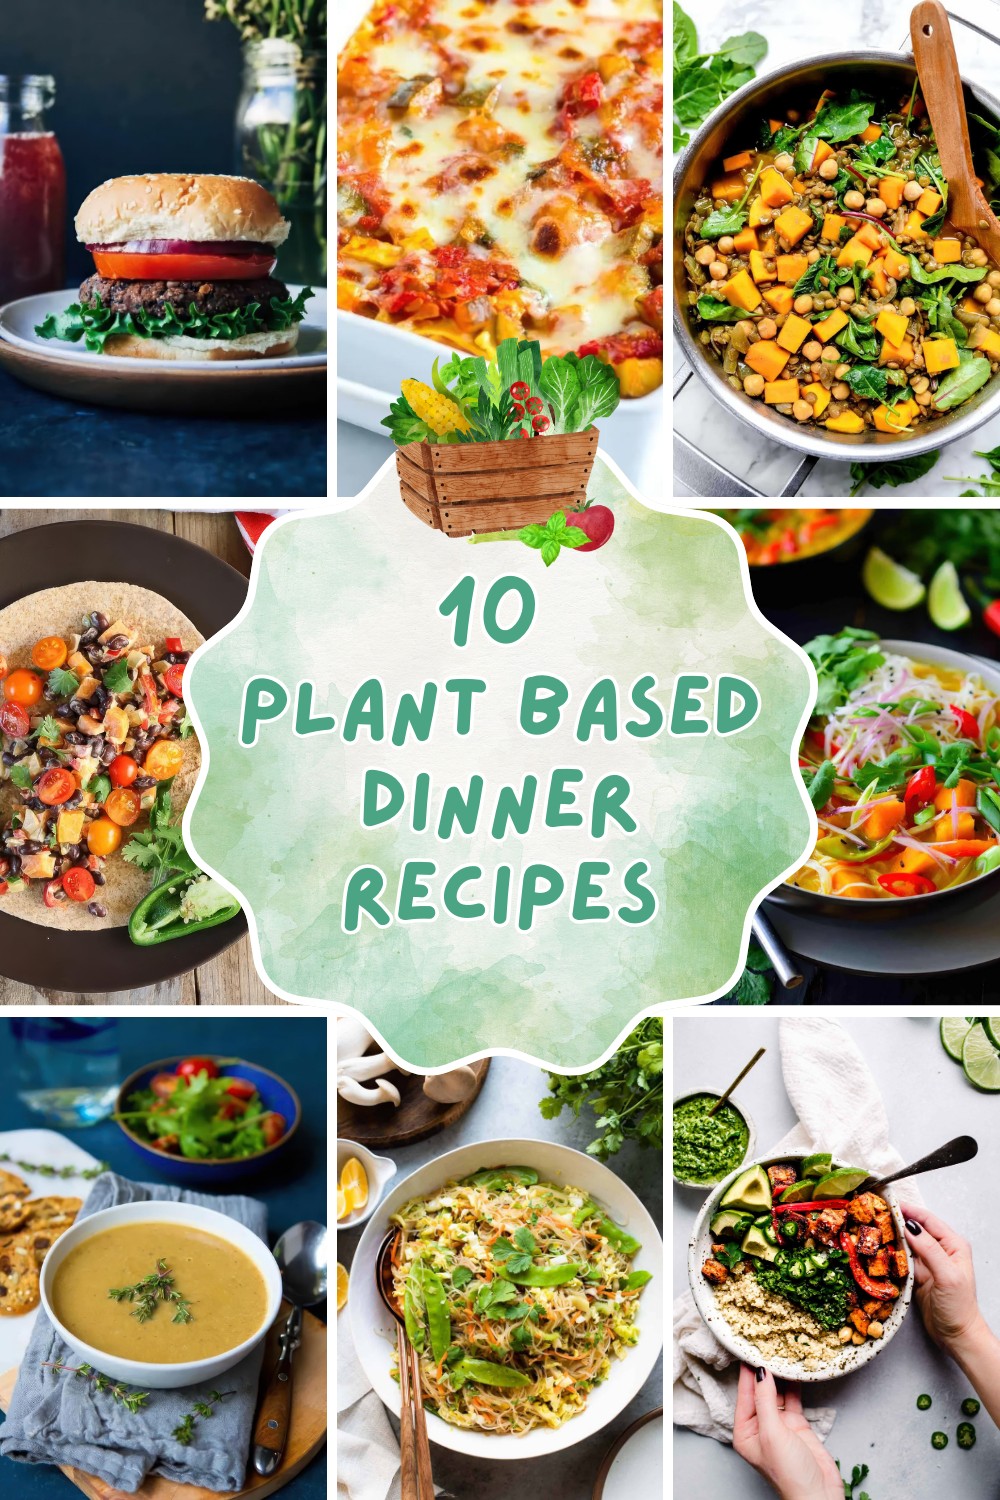 Say goodbye to boring salads! Discover these tasty plant-based dinner recipes that will satisfy the entire family, including the picky eaters. Packed with flavors and nutrients, these meals make healthy eating a breeze. 🍅🌽🥔 #PlantPowered #FamilyMeals #MeatlessMagic







